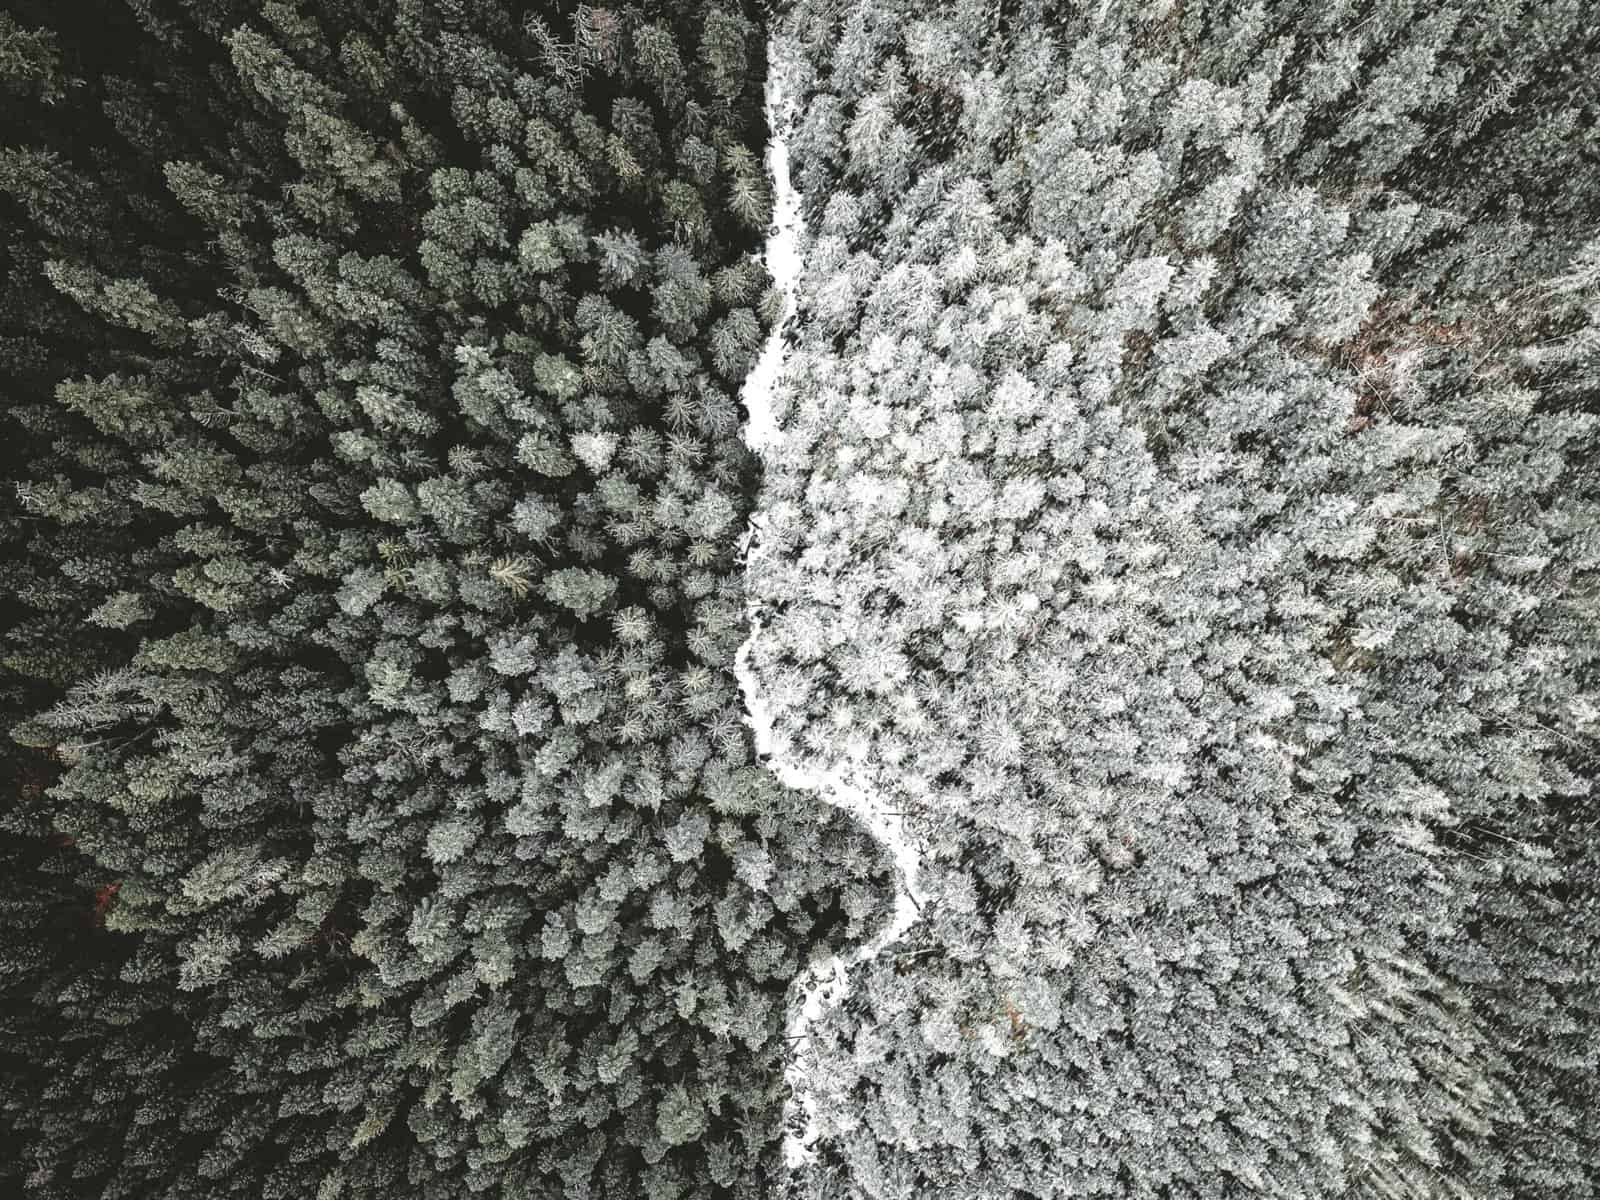 This black and white drone image shows a forest from directly overhead with a river running through the middle and the left side of the river darker than the right side of the river.